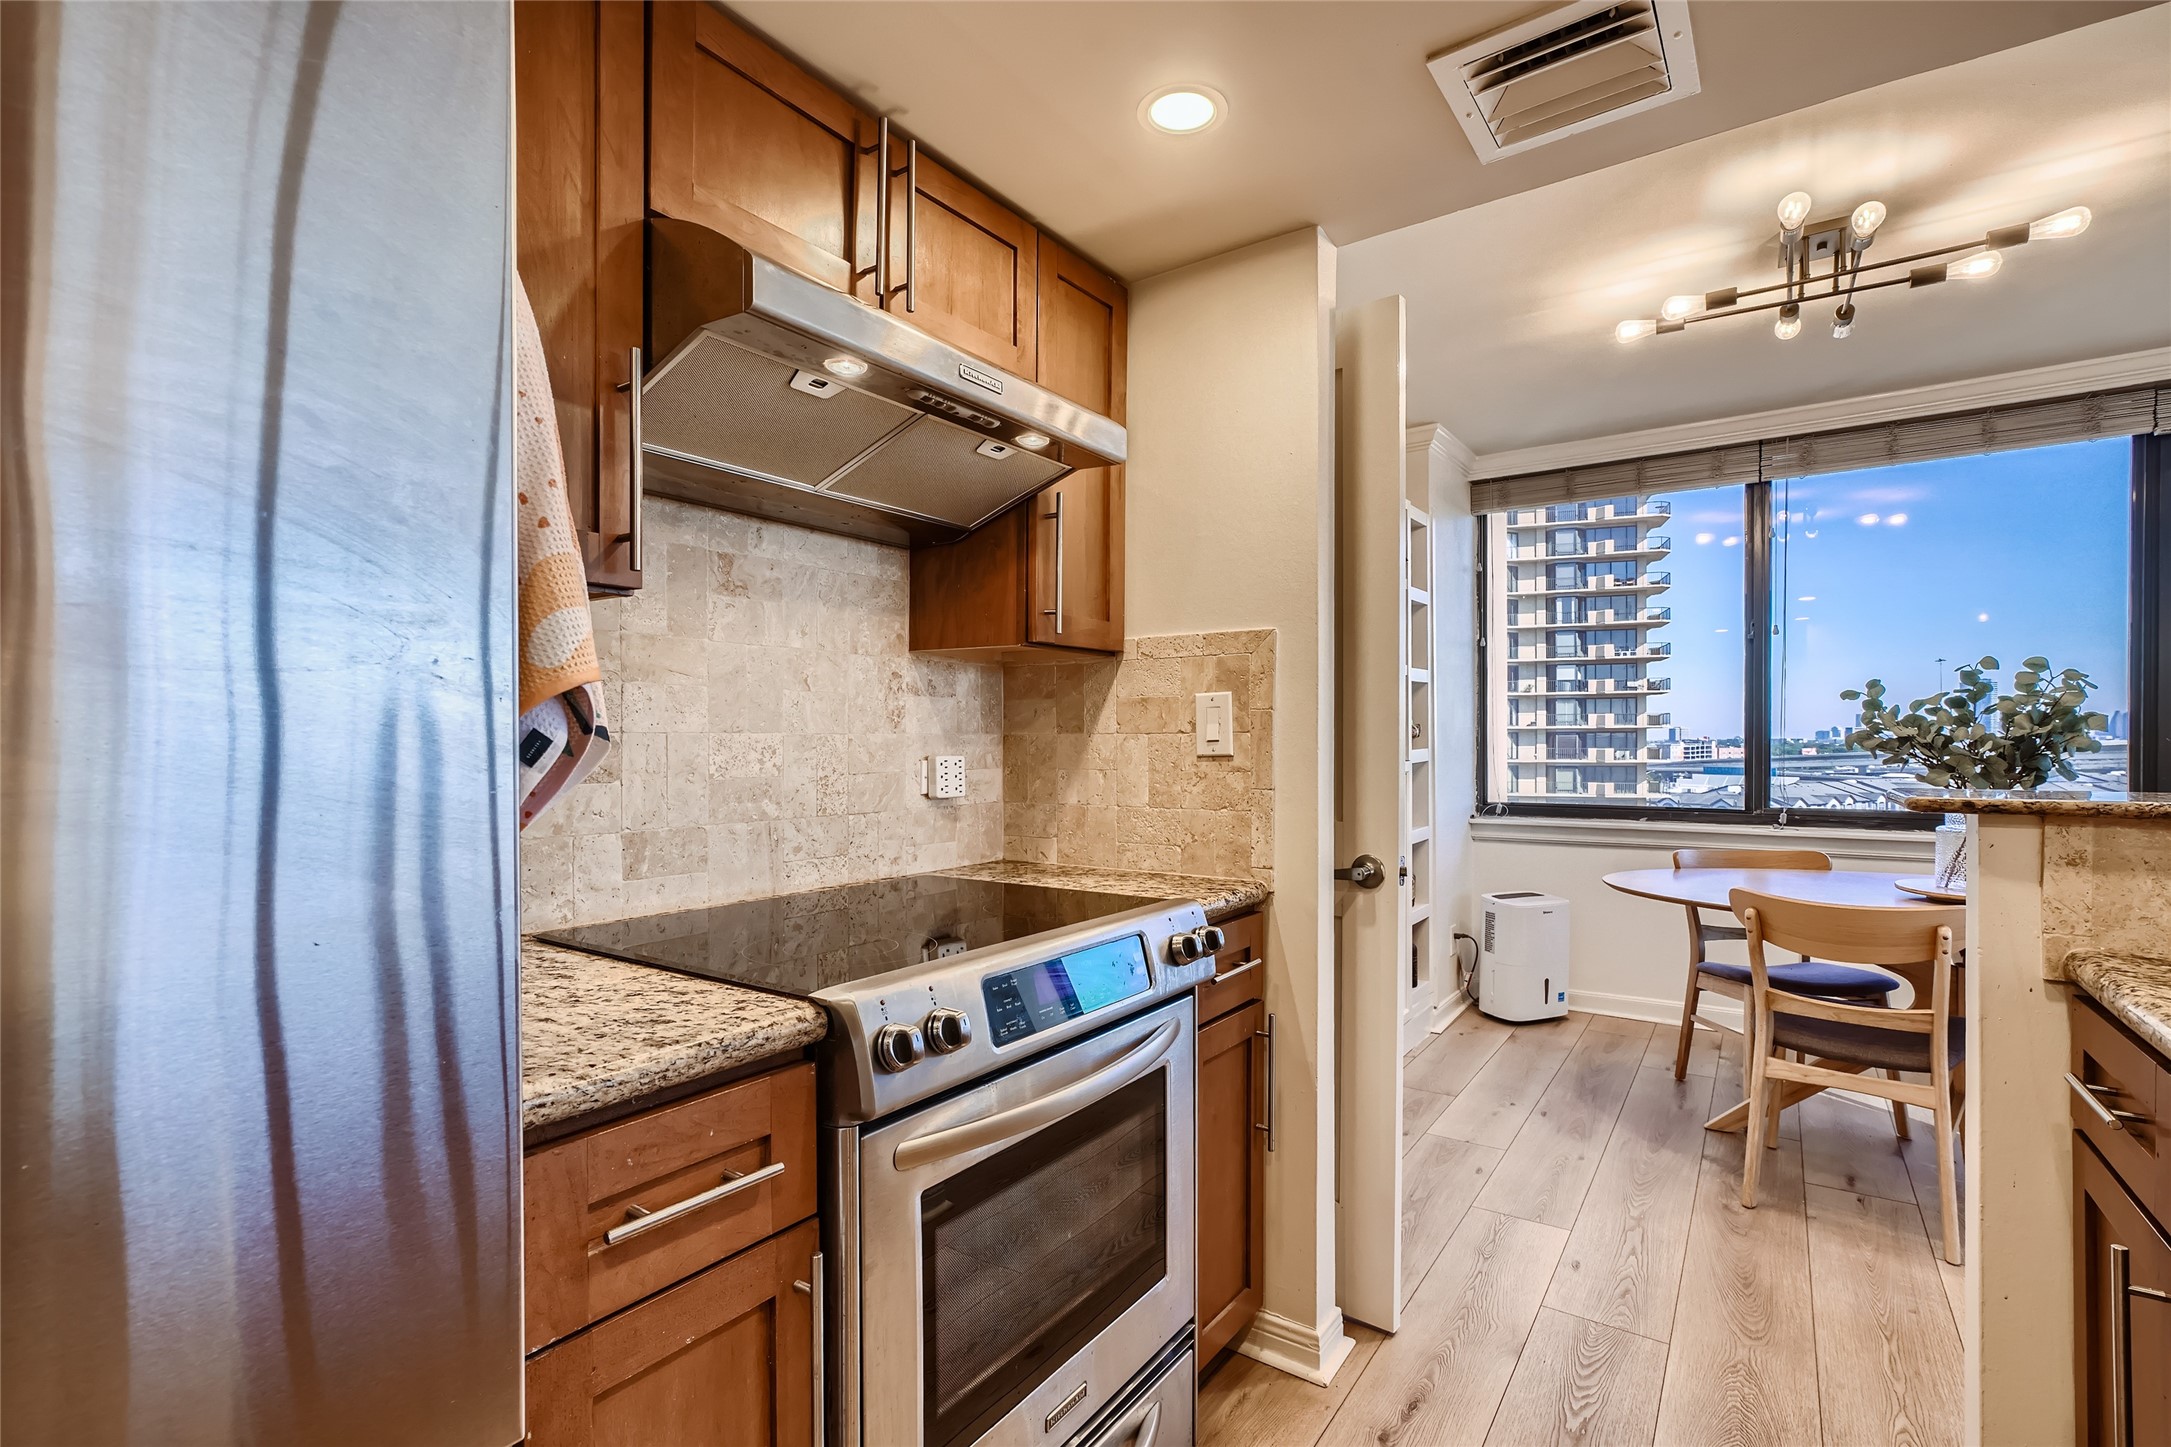 Take in another perspective of the kitchen with an east-facing view.